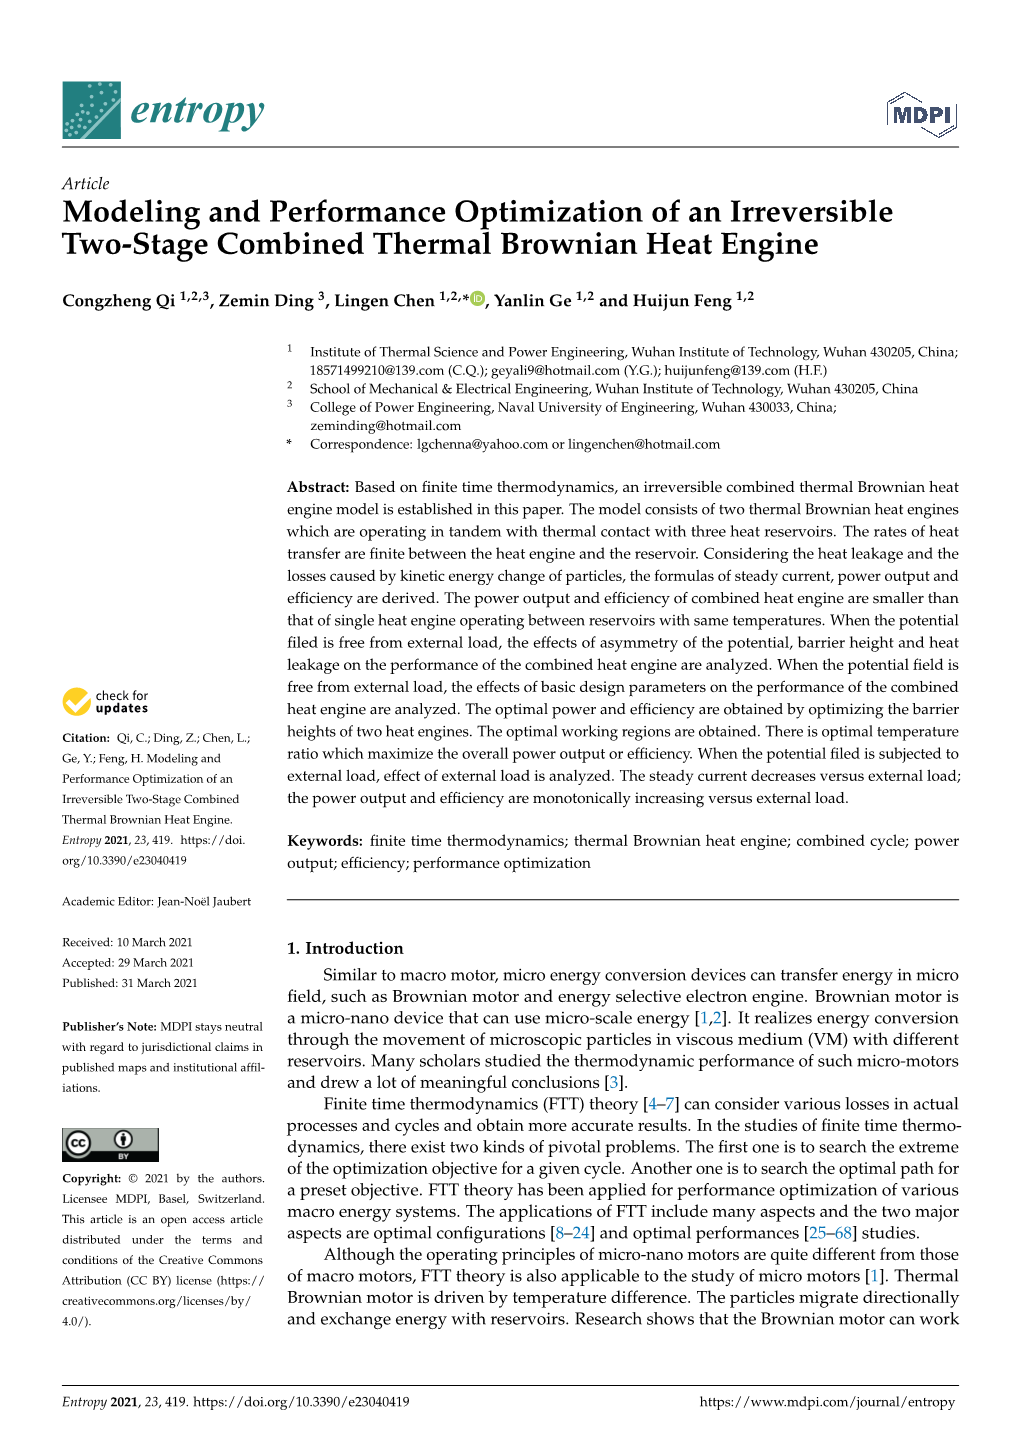 Modeling and Performance Optimization of an Irreversible Two-Stage Combined Thermal Brownian Heat Engine